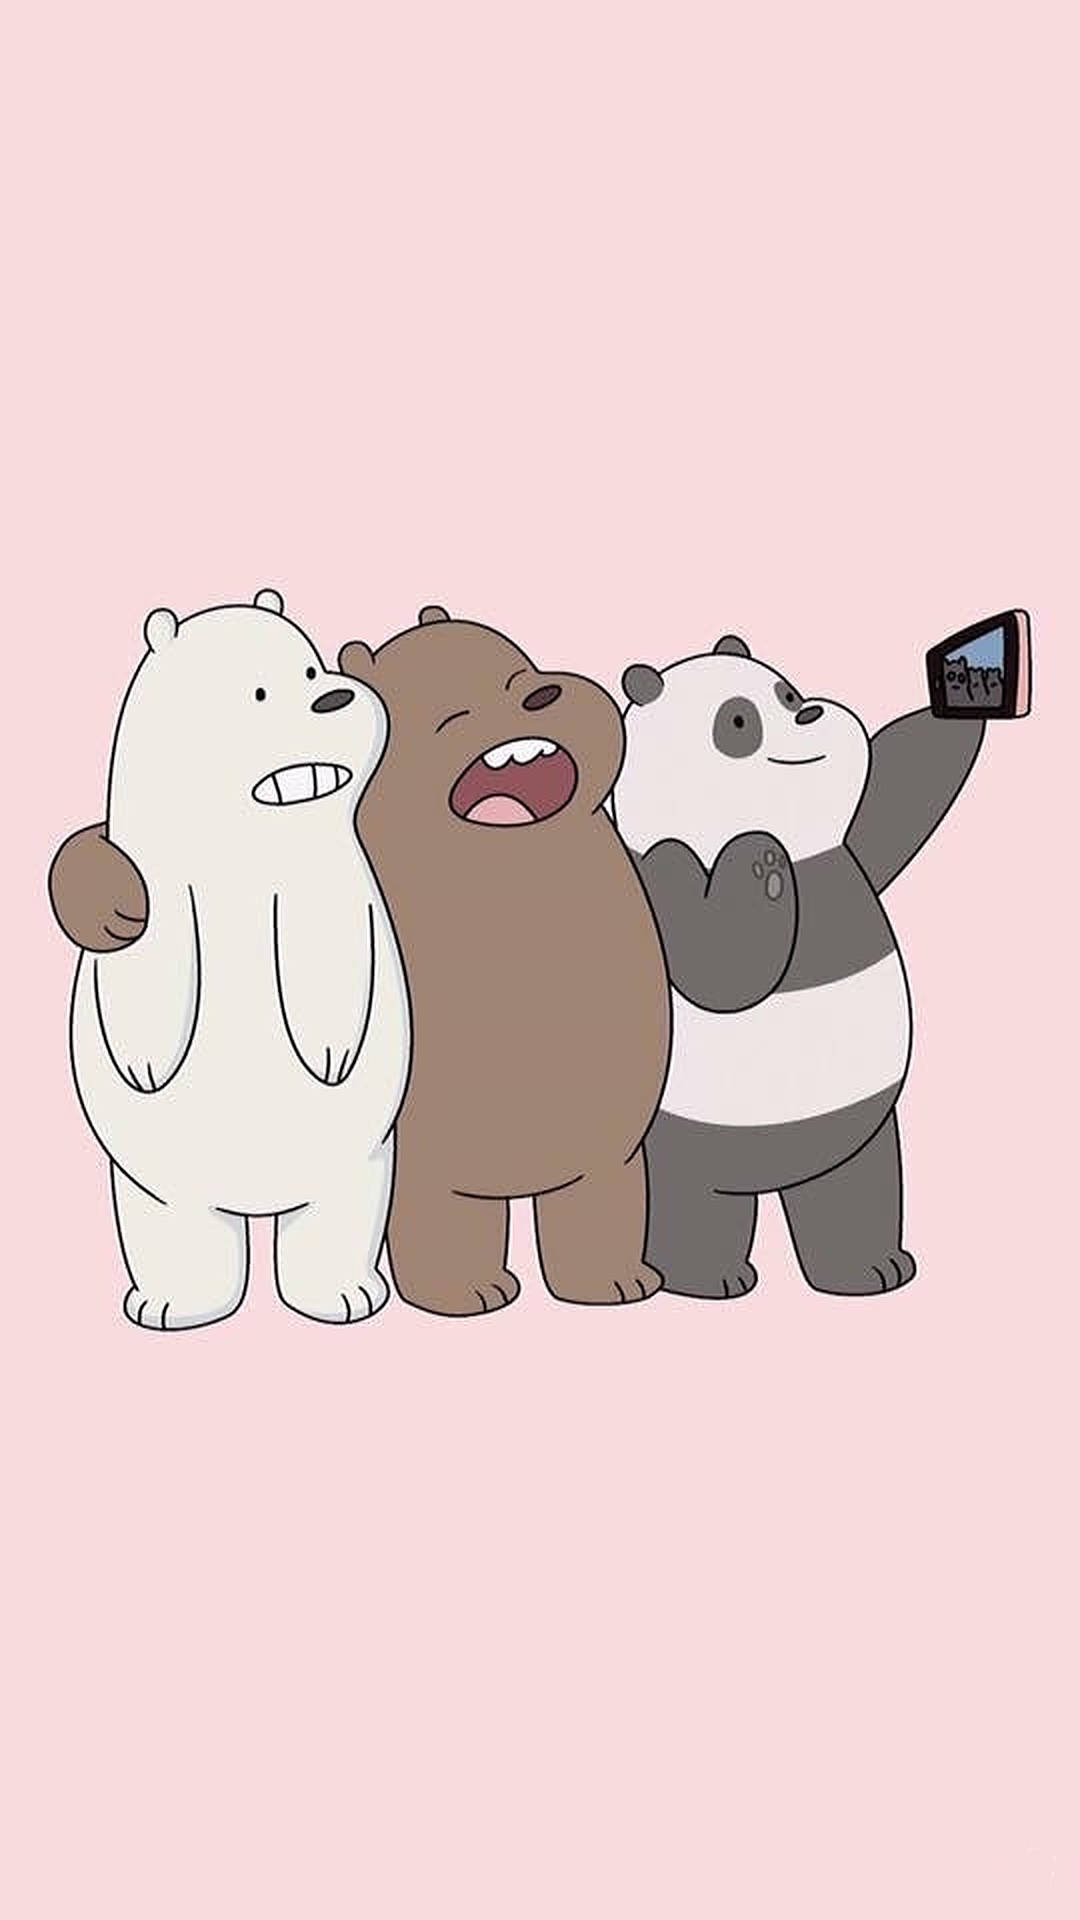 Free Three Bears Wallpaper Downloads, [100+] Three Bears Wallpapers for  FREE 